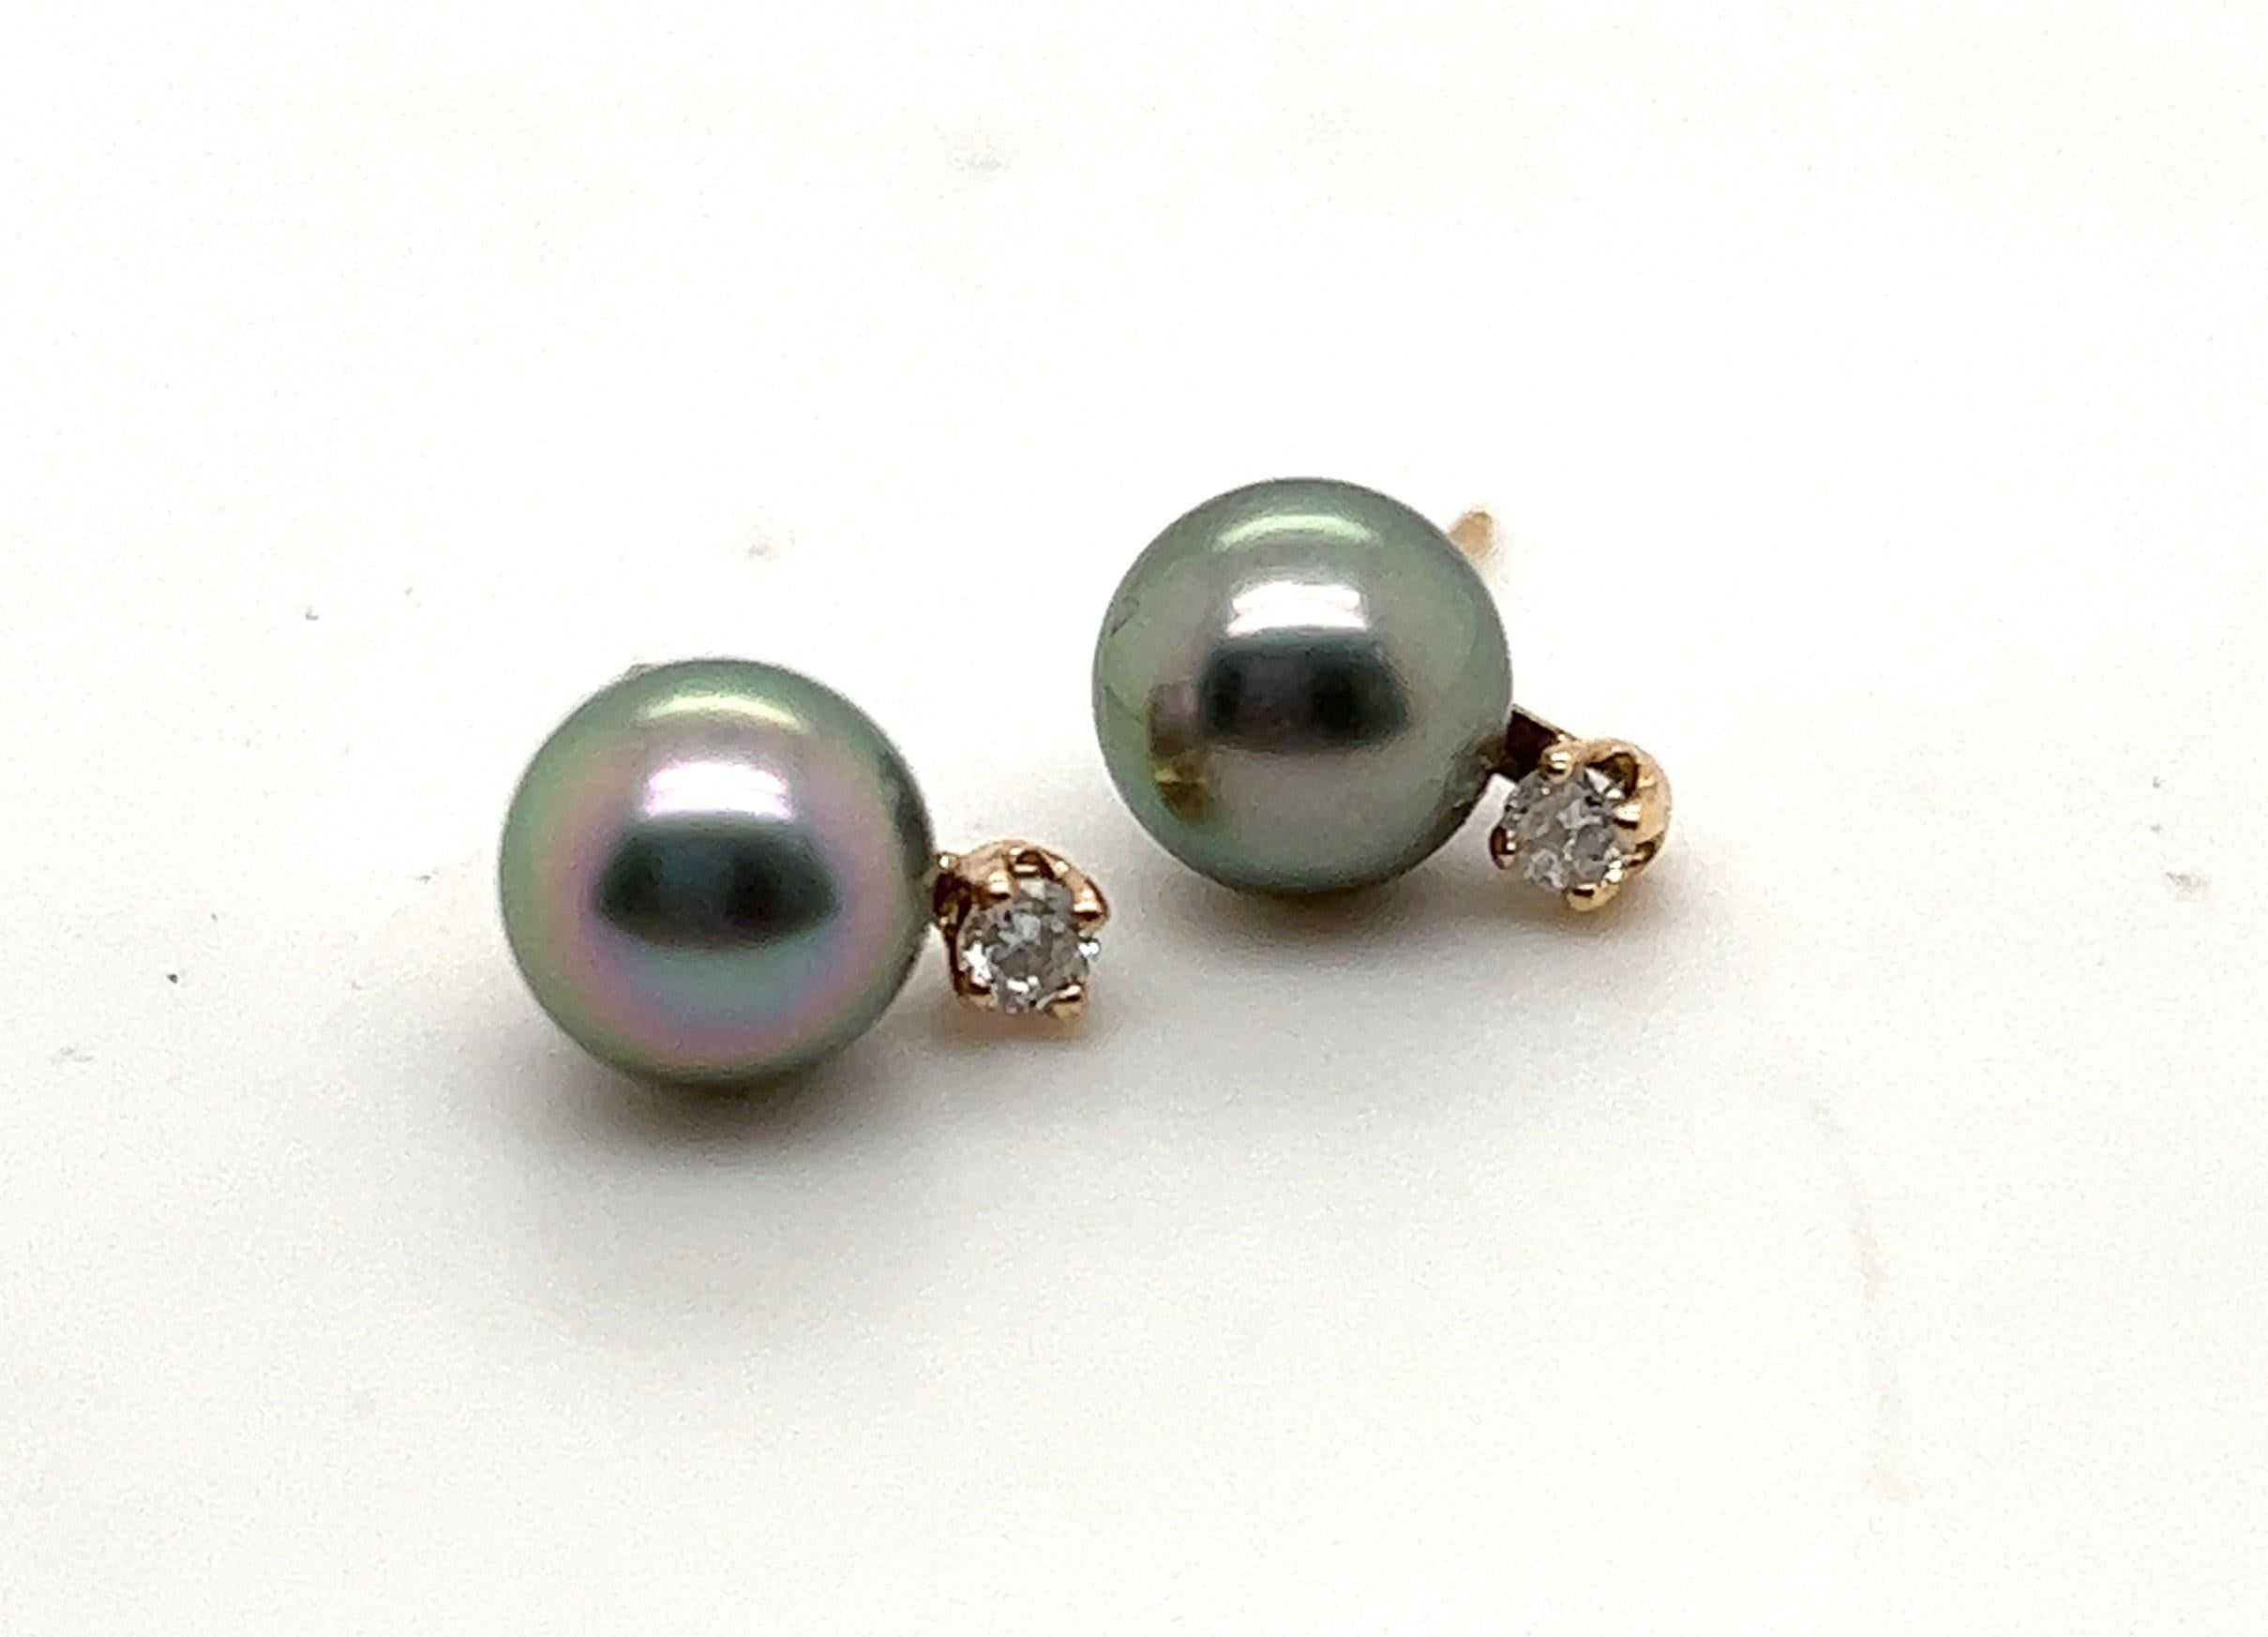 14kt yellow gold stud earrings with 7mm round black pearls and approximately .06 carats of H-I/I1-I2 diamonds. 

The earrings measure 3/8 inch long. 